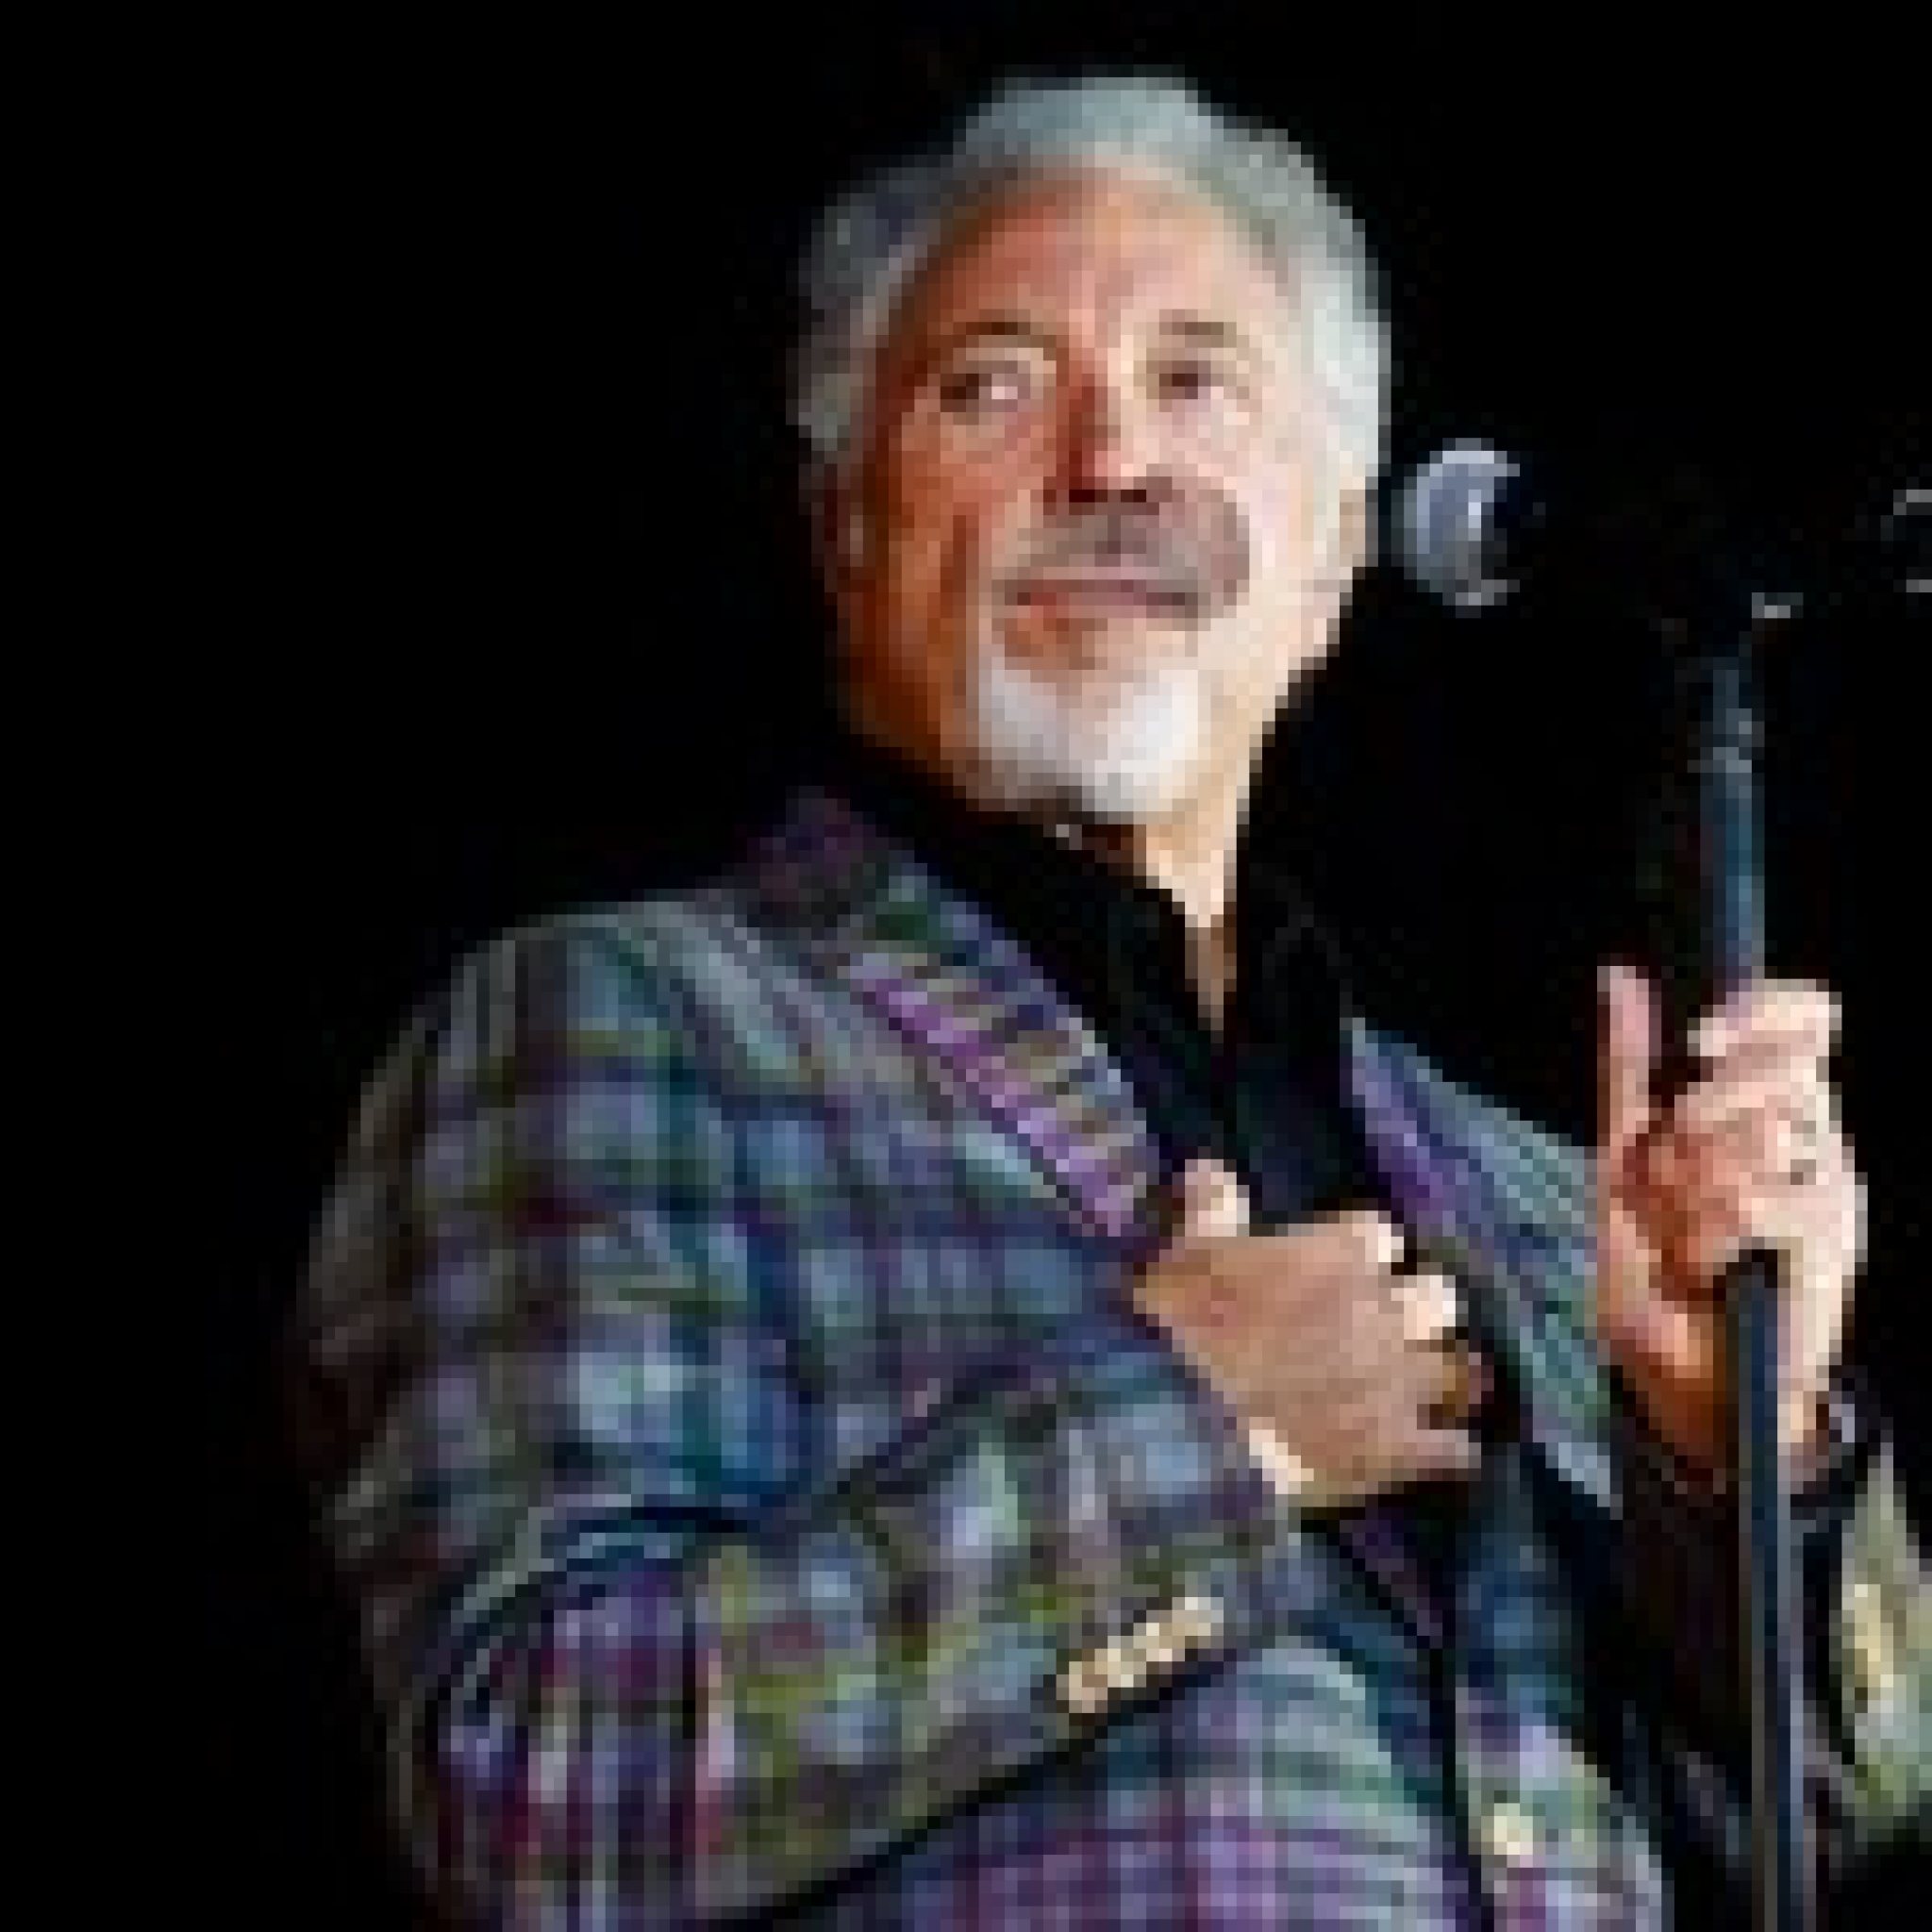 Tom Jones Lands Record-Setting U.K. No. 1 With ‘Surrounded By Time’